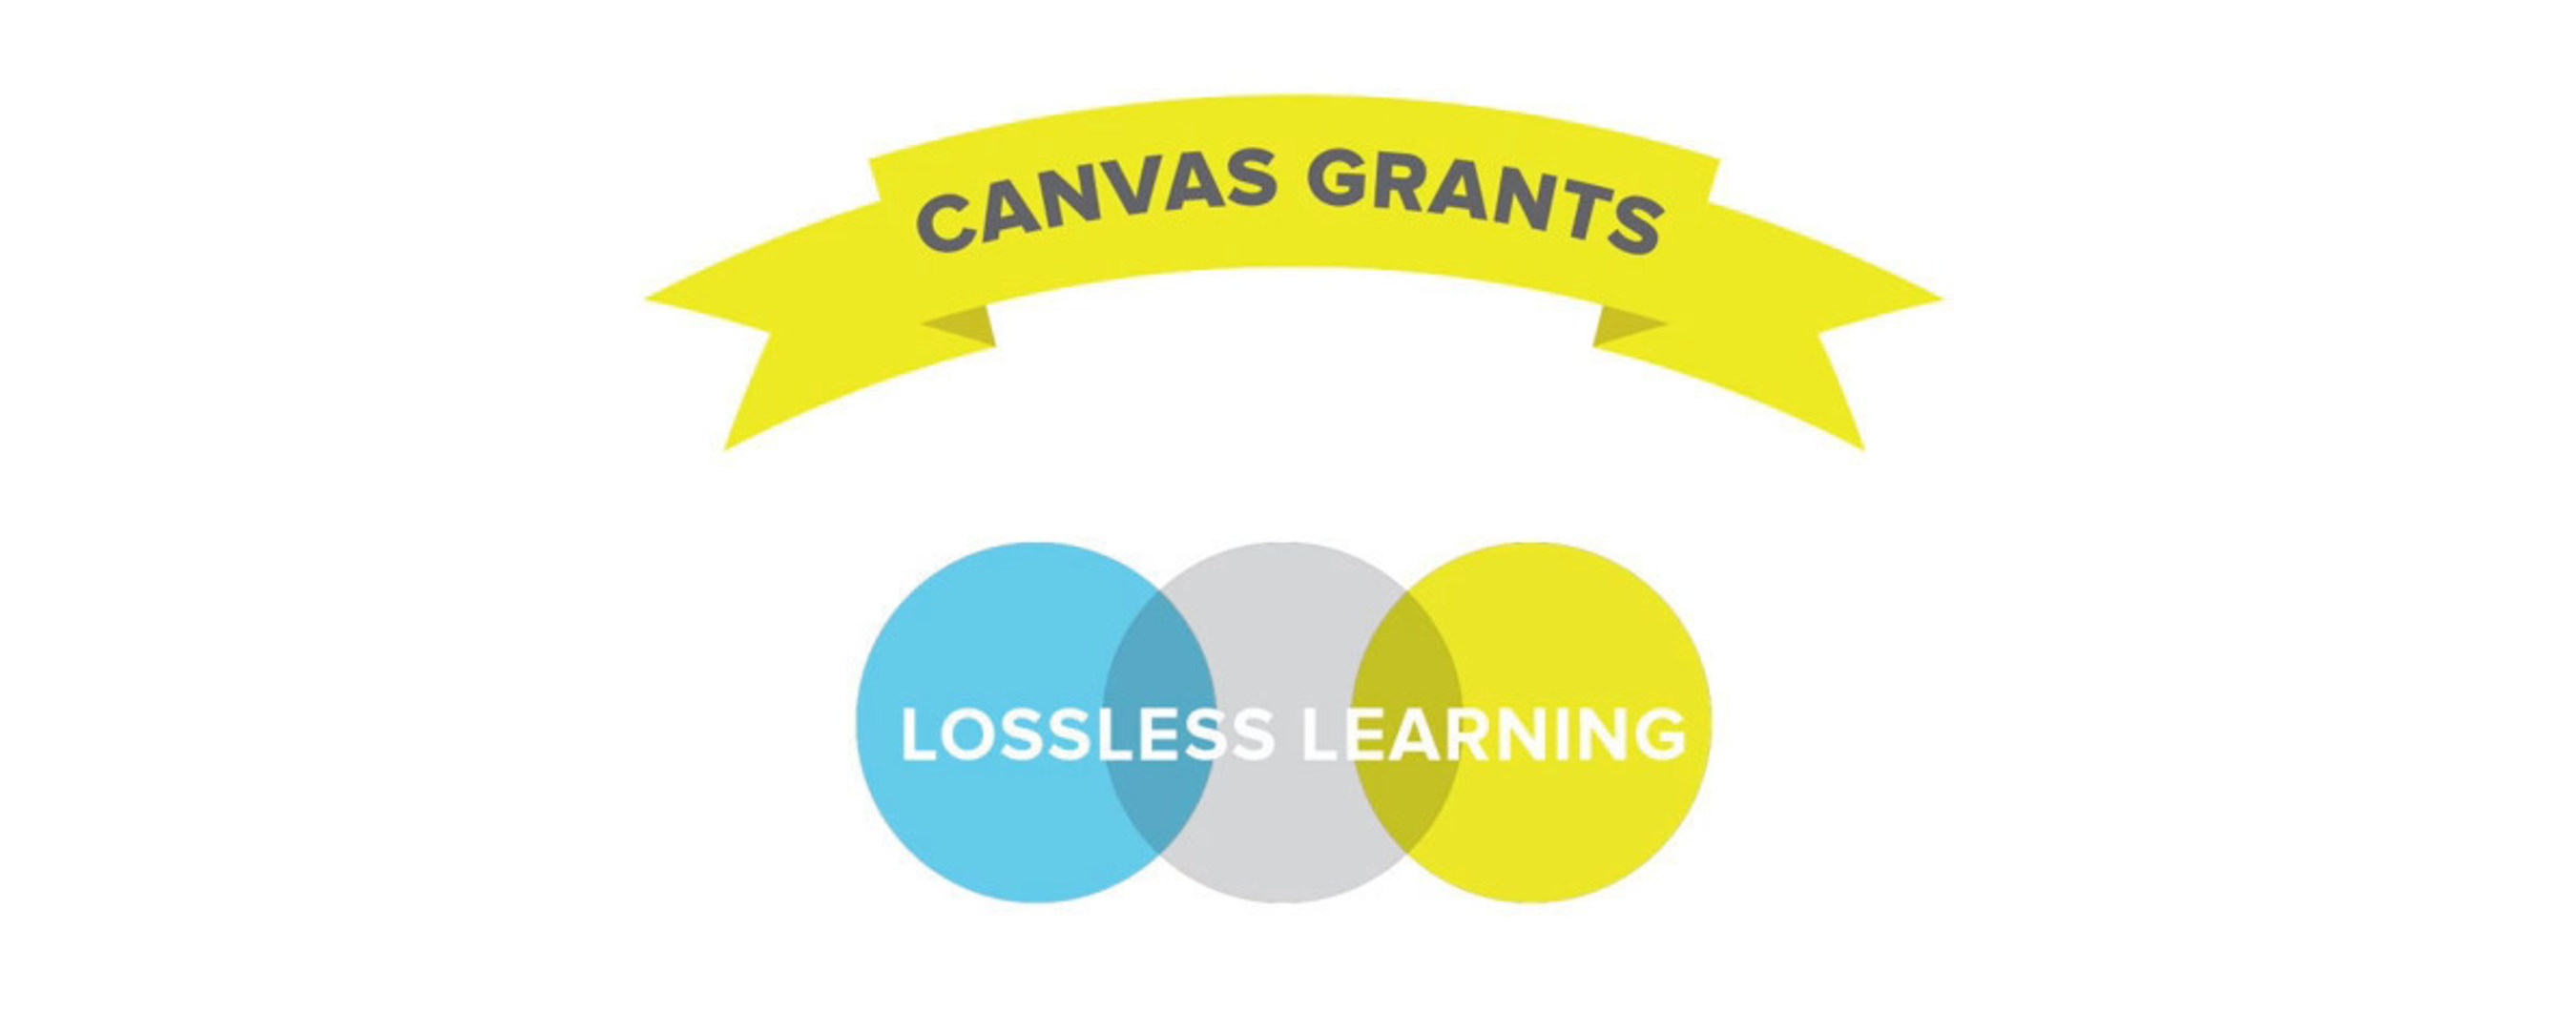 Learning technology company Instructure, the creator of the Canvas learning management system (LMS) for K-12 and higher education, today announced the return of Canvas Grants, a program that awards $100,000 in grants to projects that spur innovation in learning. The company introduced the program at the annual EDUCAUSE conference in Orlando, Fla., inviting innovators in both K-12 and higher ed to submit proposals that further "lossless learning," this year's Canvas Grants theme. (PRNewsFoto/Instructure)